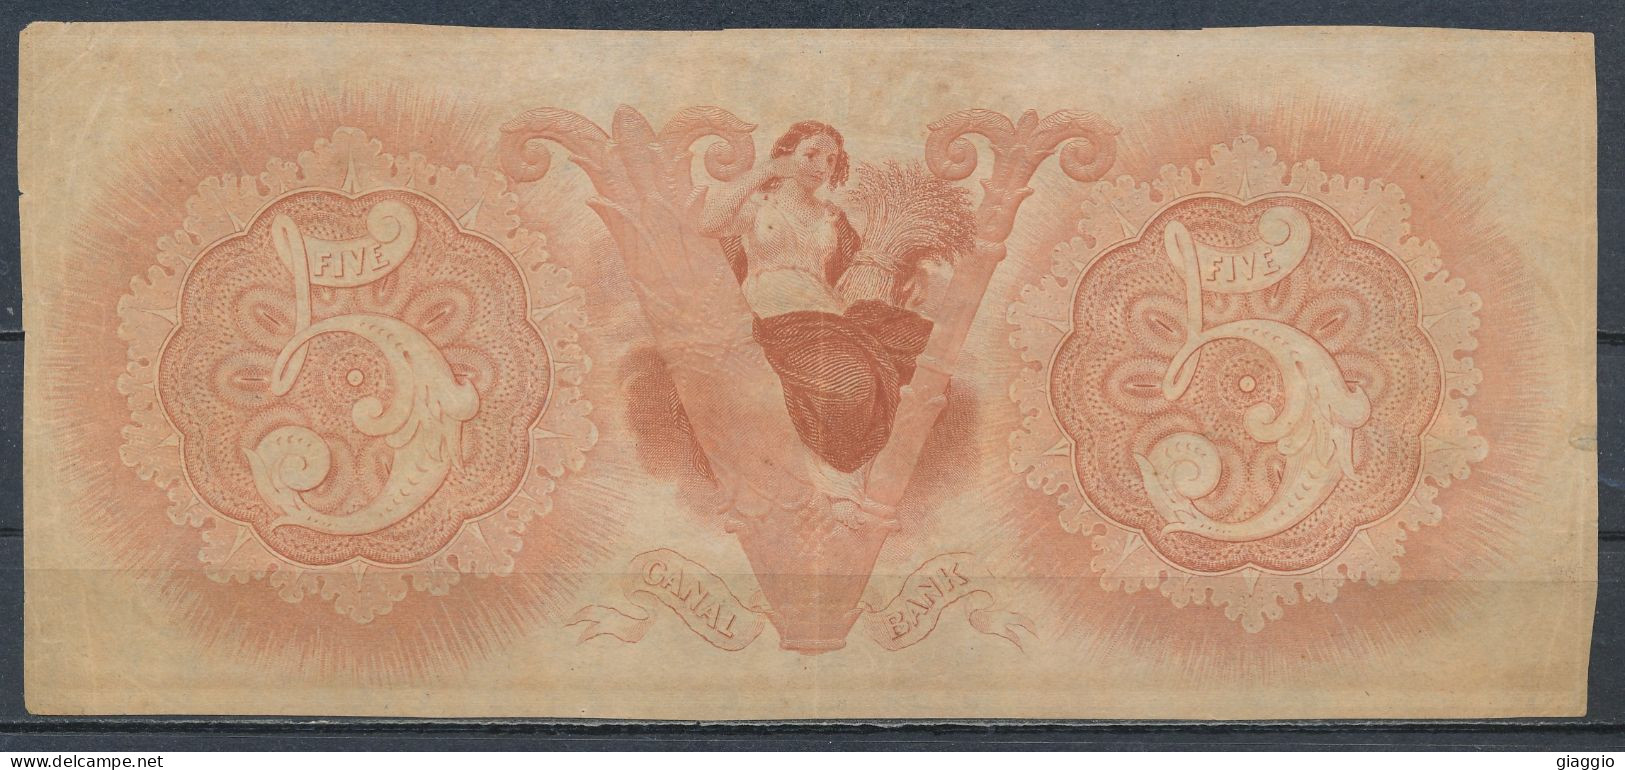 °°° USA - 5 DOLLARS 1840 CANAL BANK NEW ORLEANS D °°° - Confederate (1861-1864)